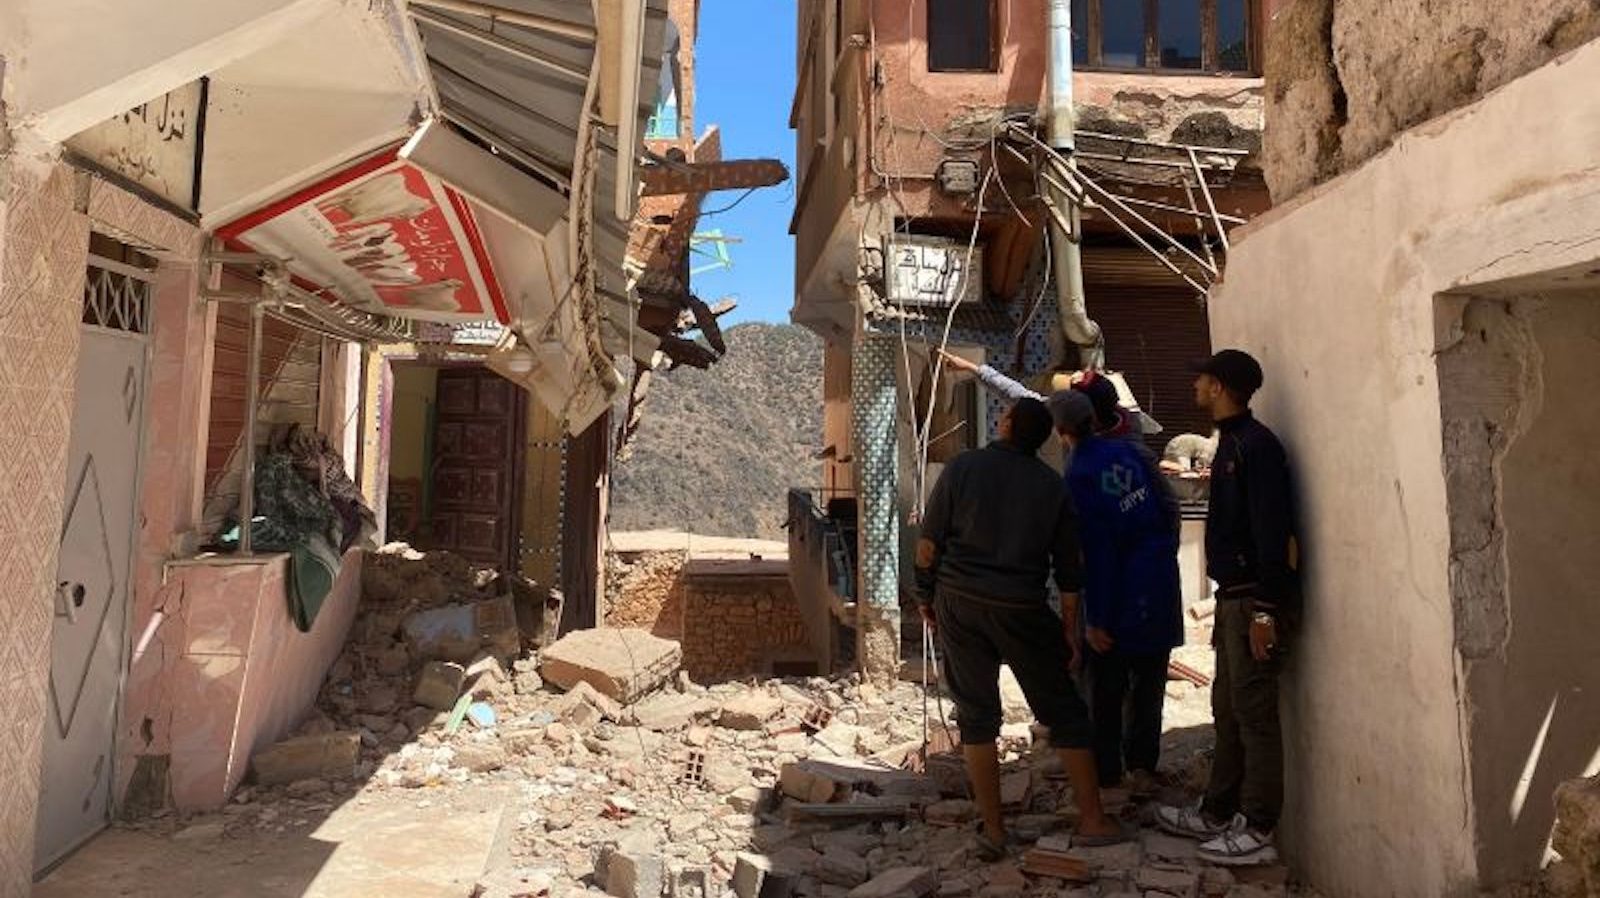 Survivors of the earthquake in Morocco are abandoned to their fate in the Atlas Mountains